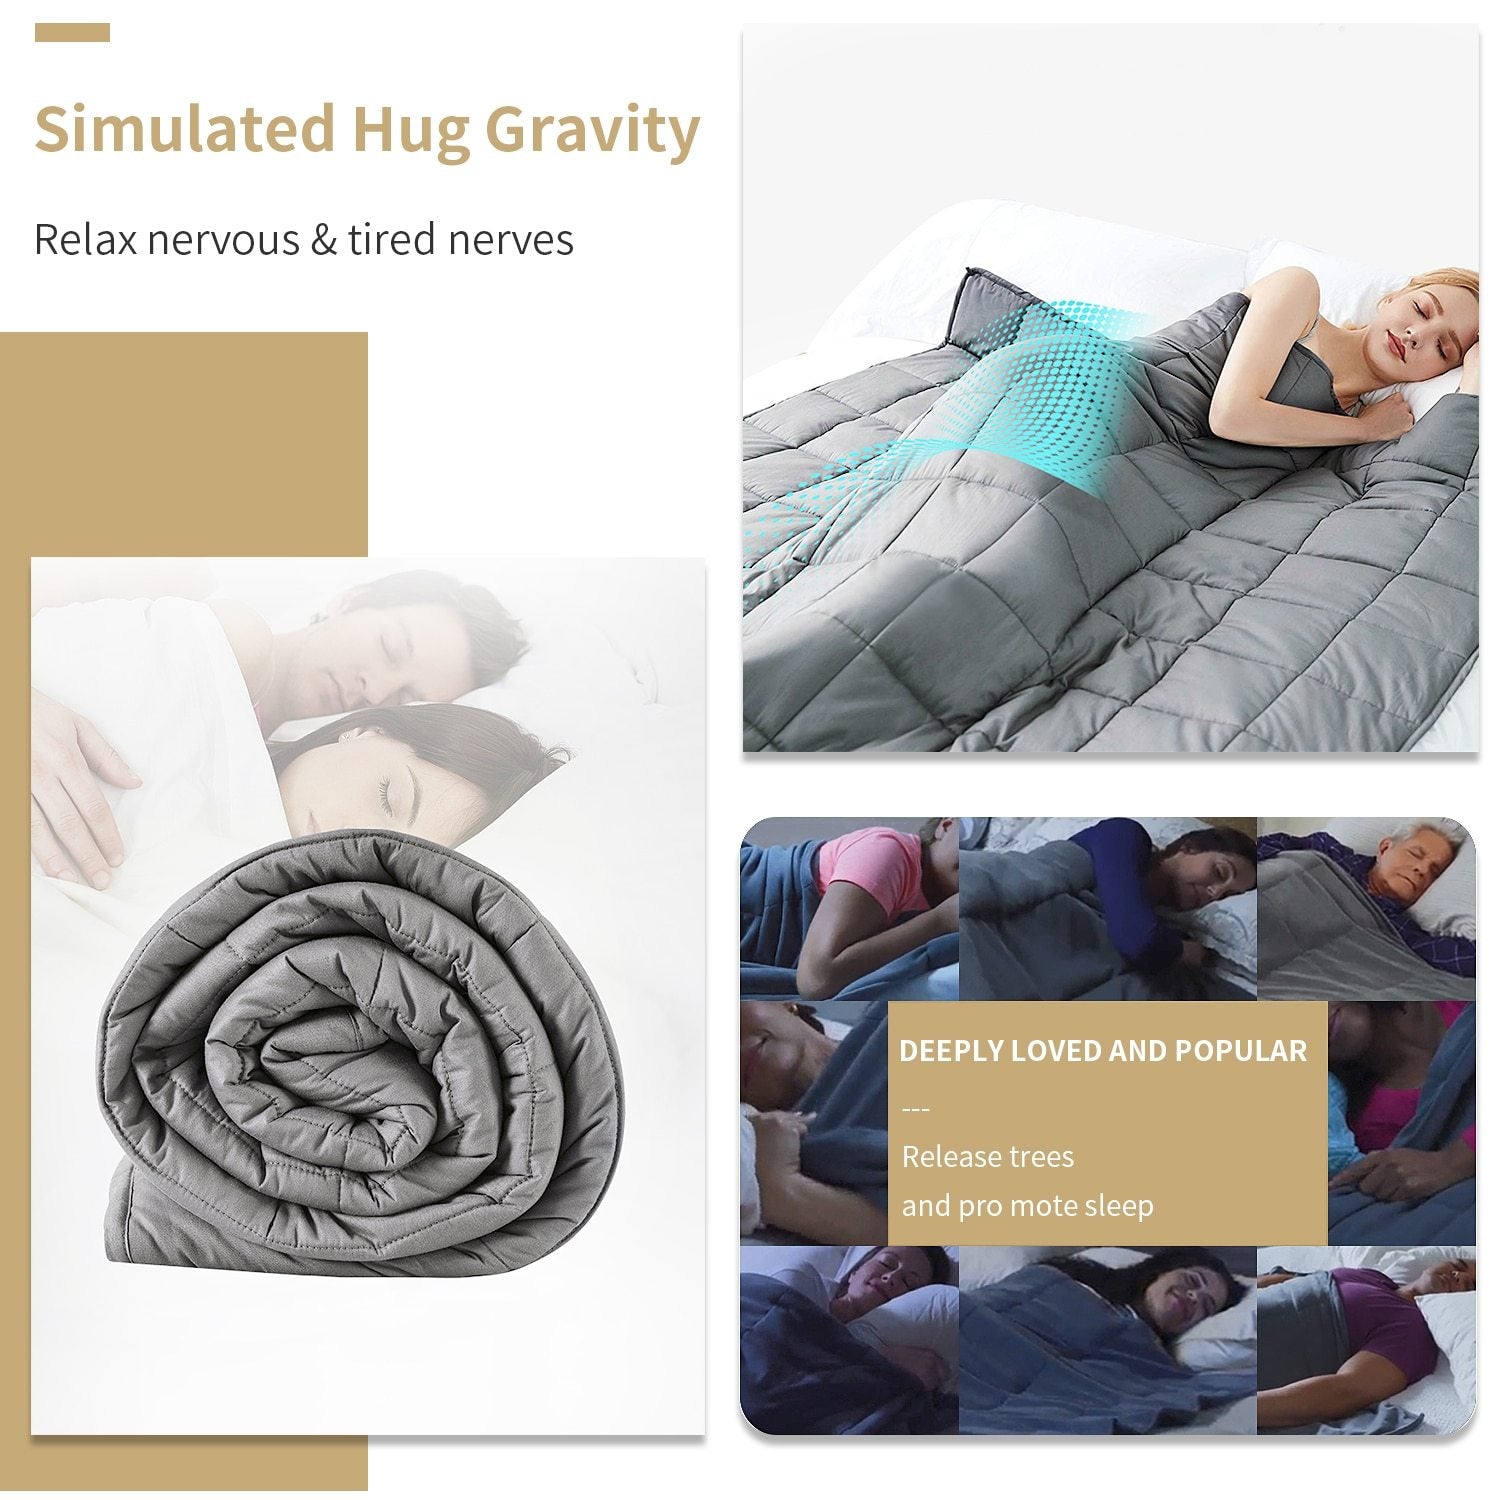 6.8kg/9kg Weighted Cotton Blanket For Adult, Full and Queen Size Cover